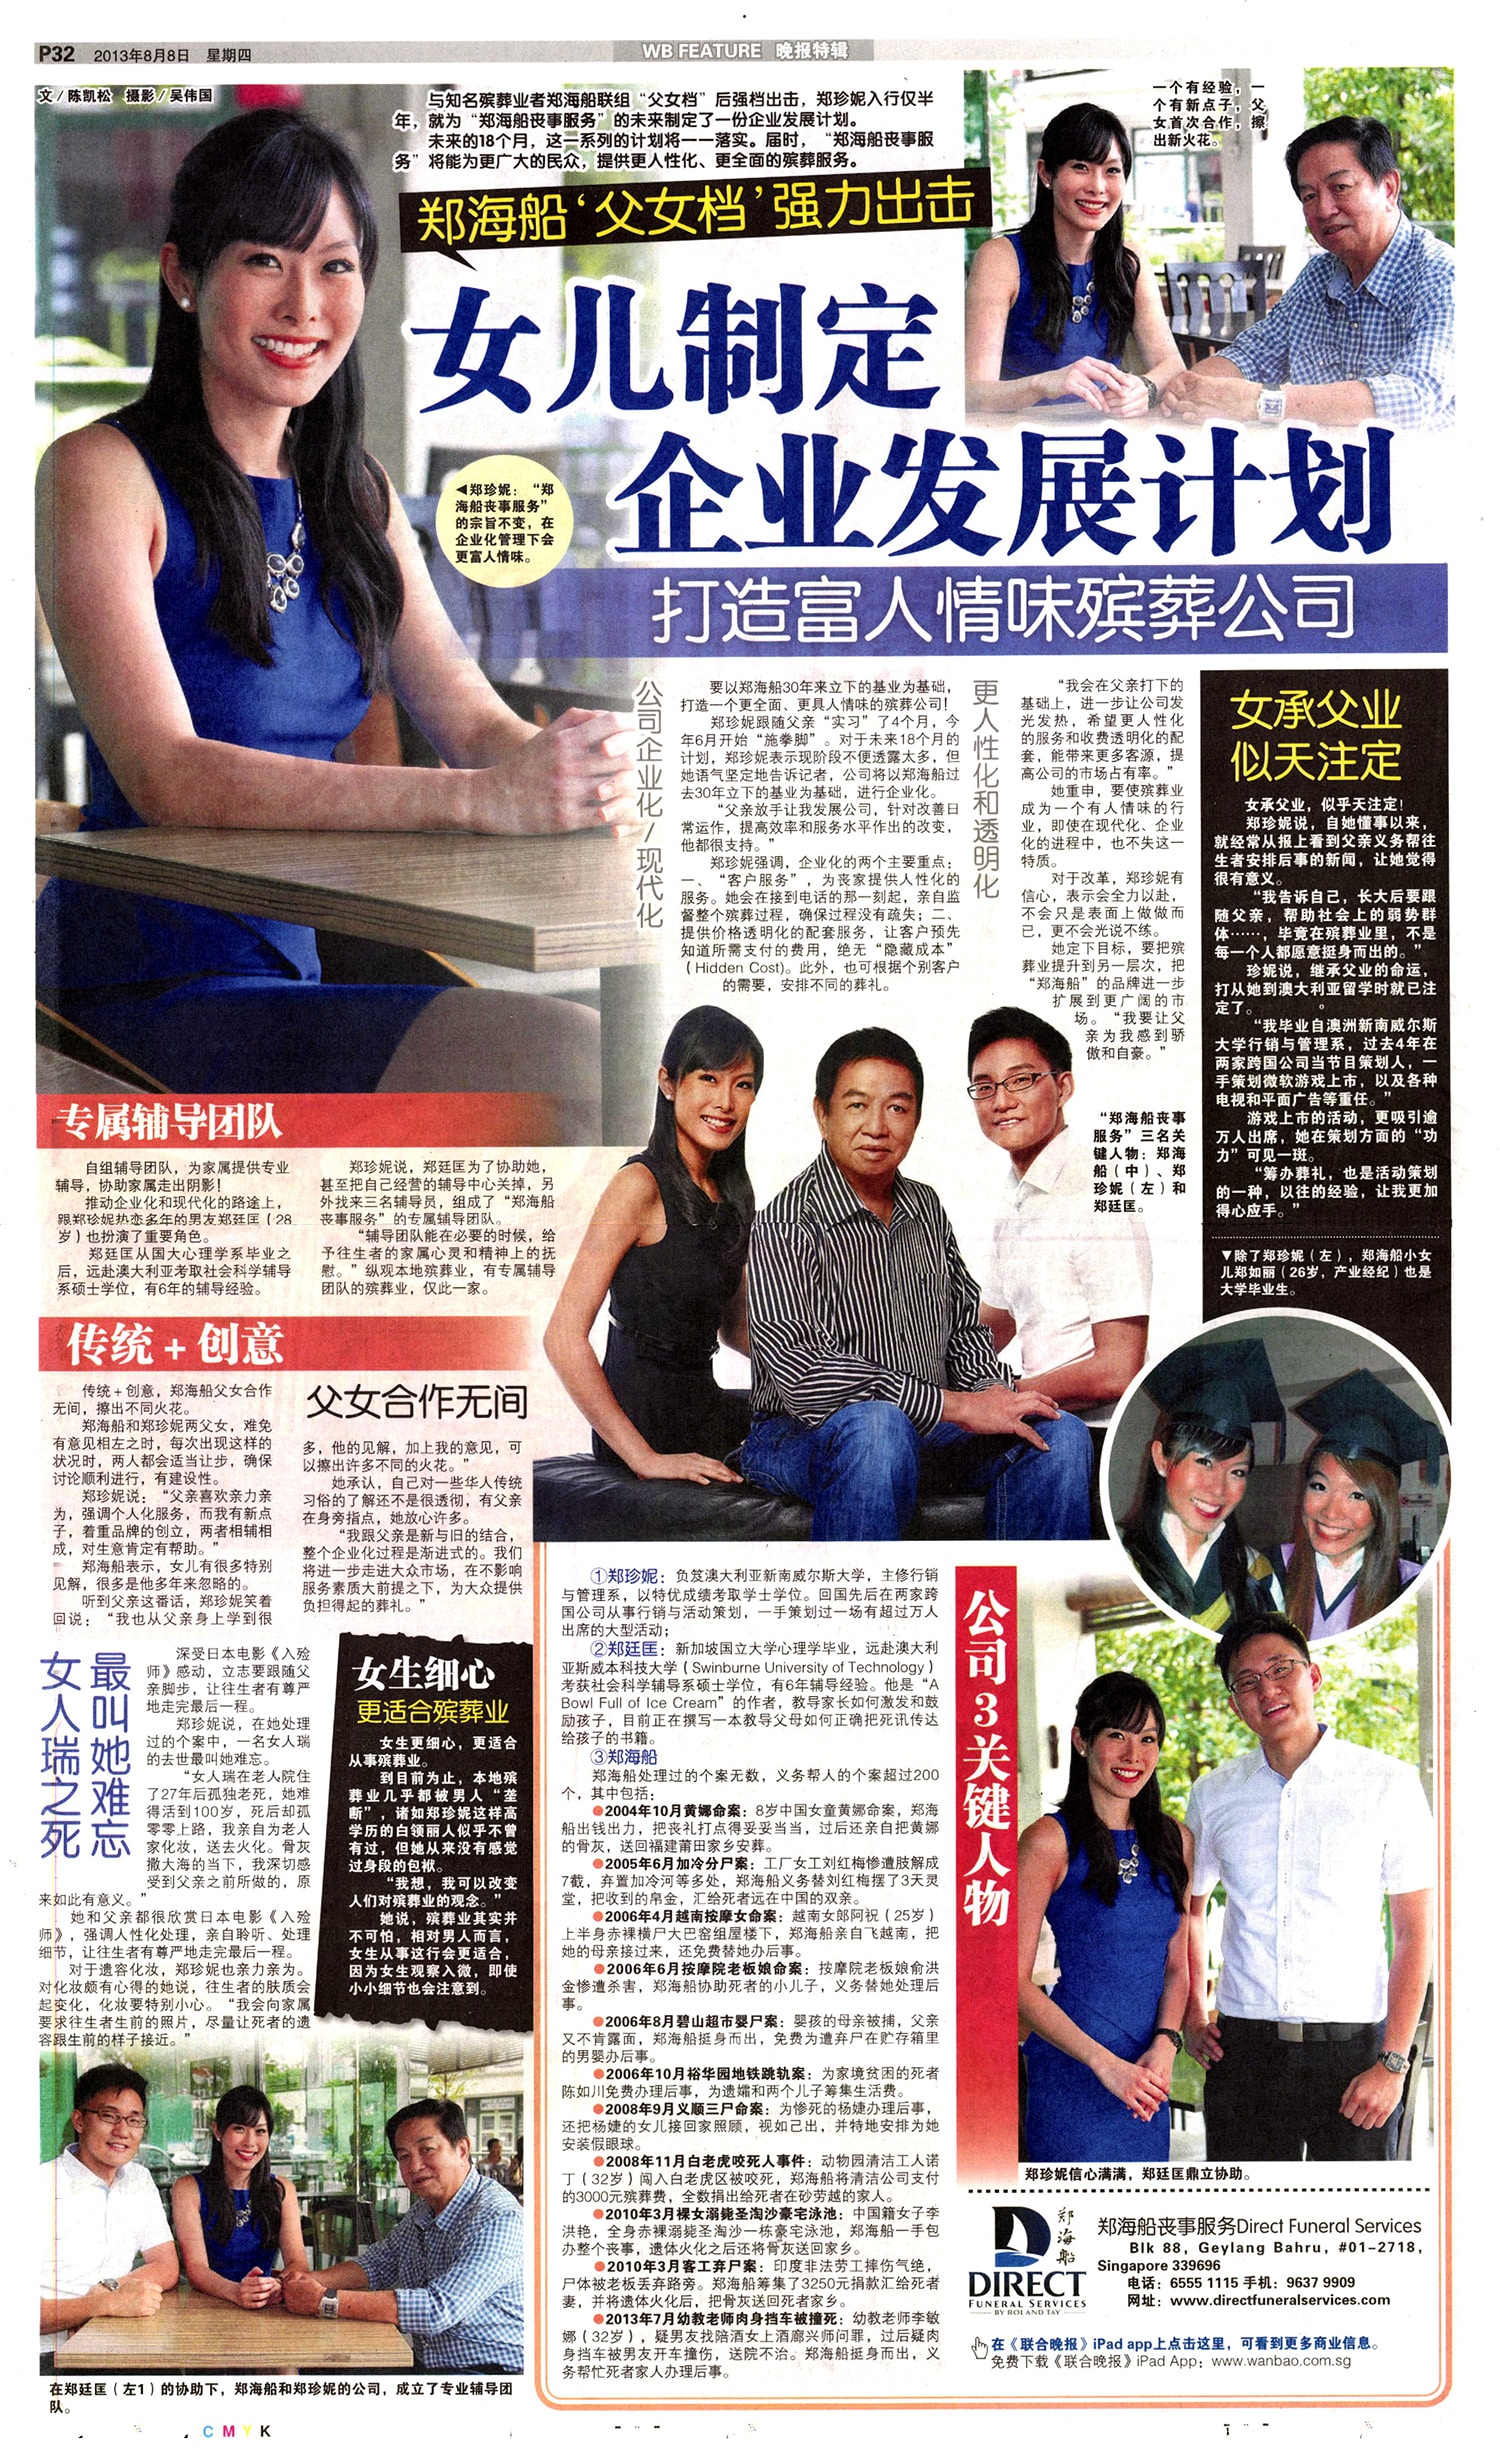 Article - 20130808